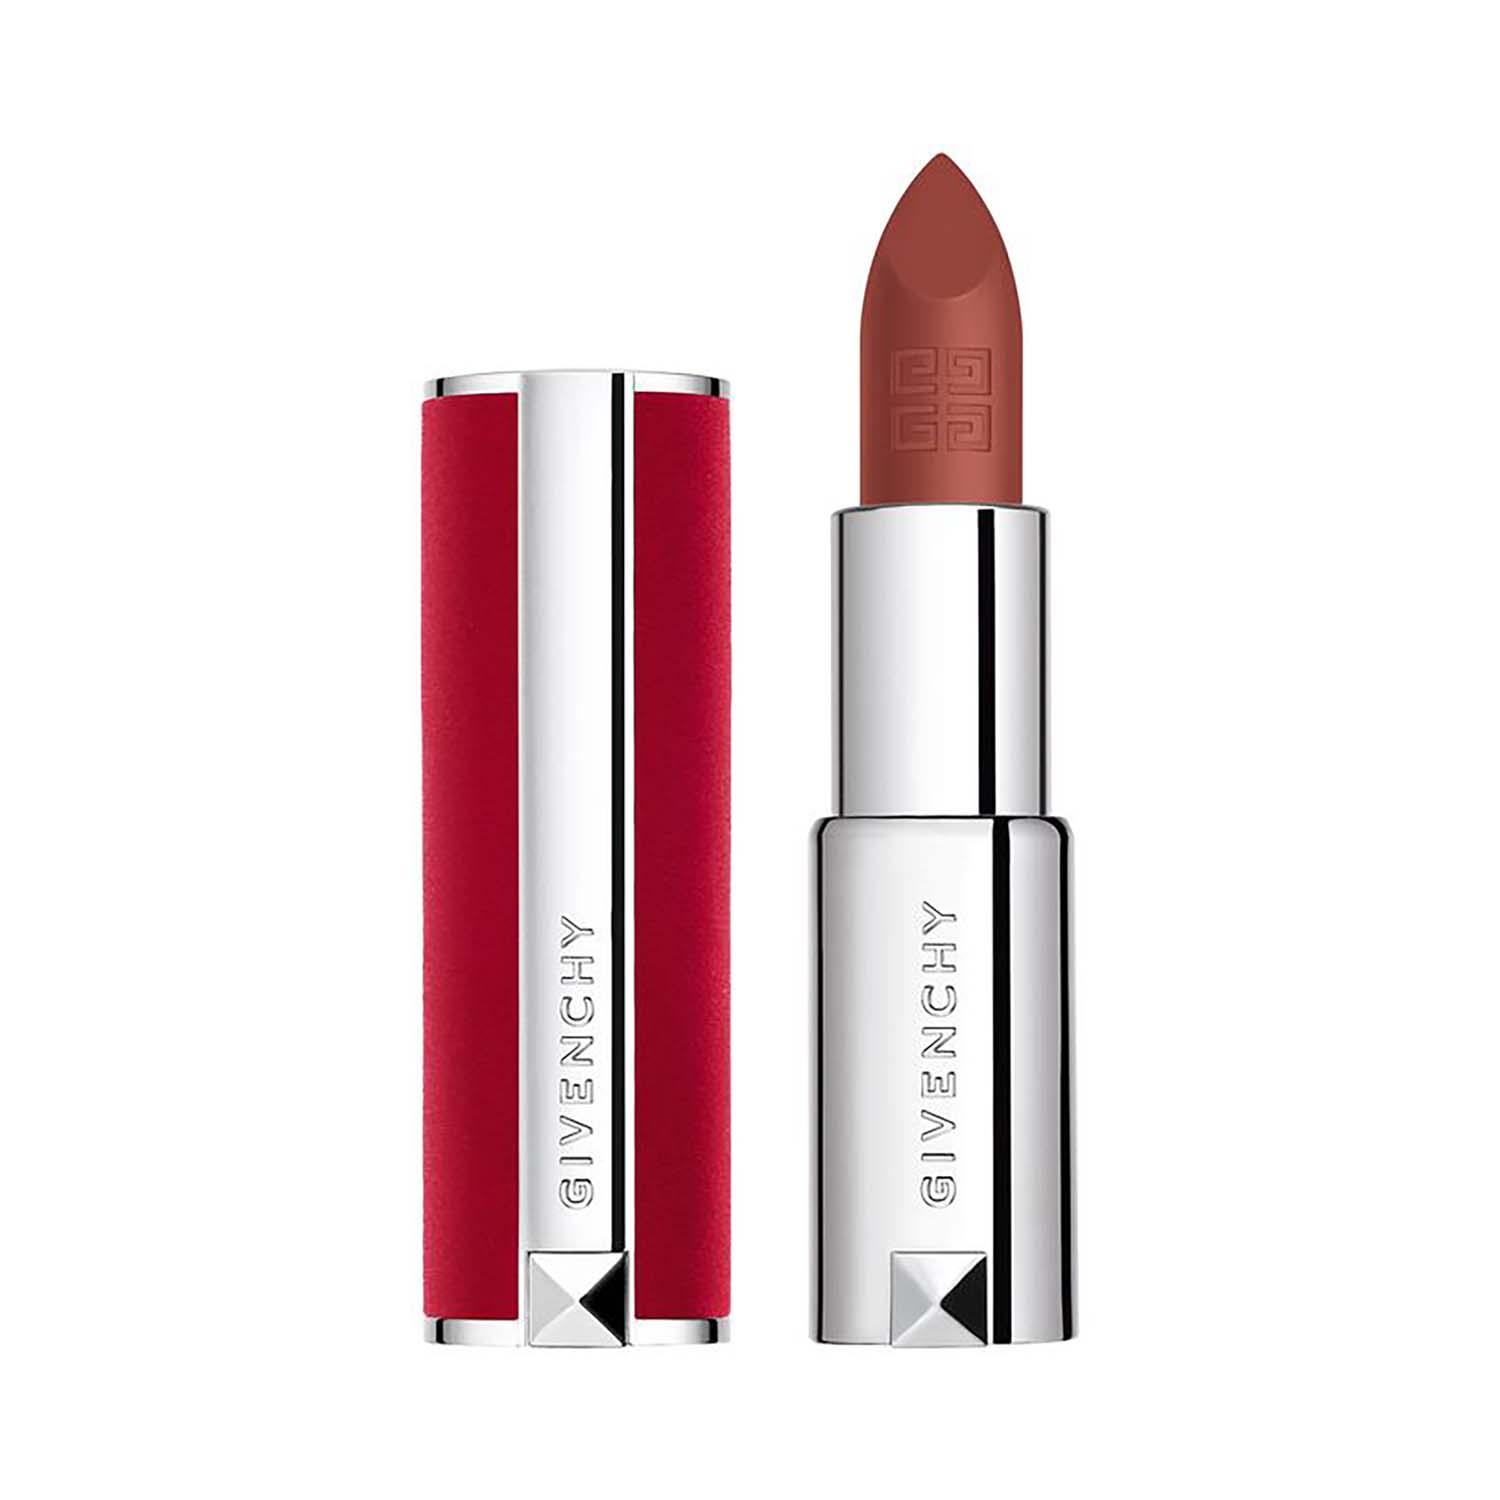 Givenchy | Givenchy Le Rouge Deep Velvet 23 Ext Matte Lipstick - N15 Nude Amber (3.4 g)